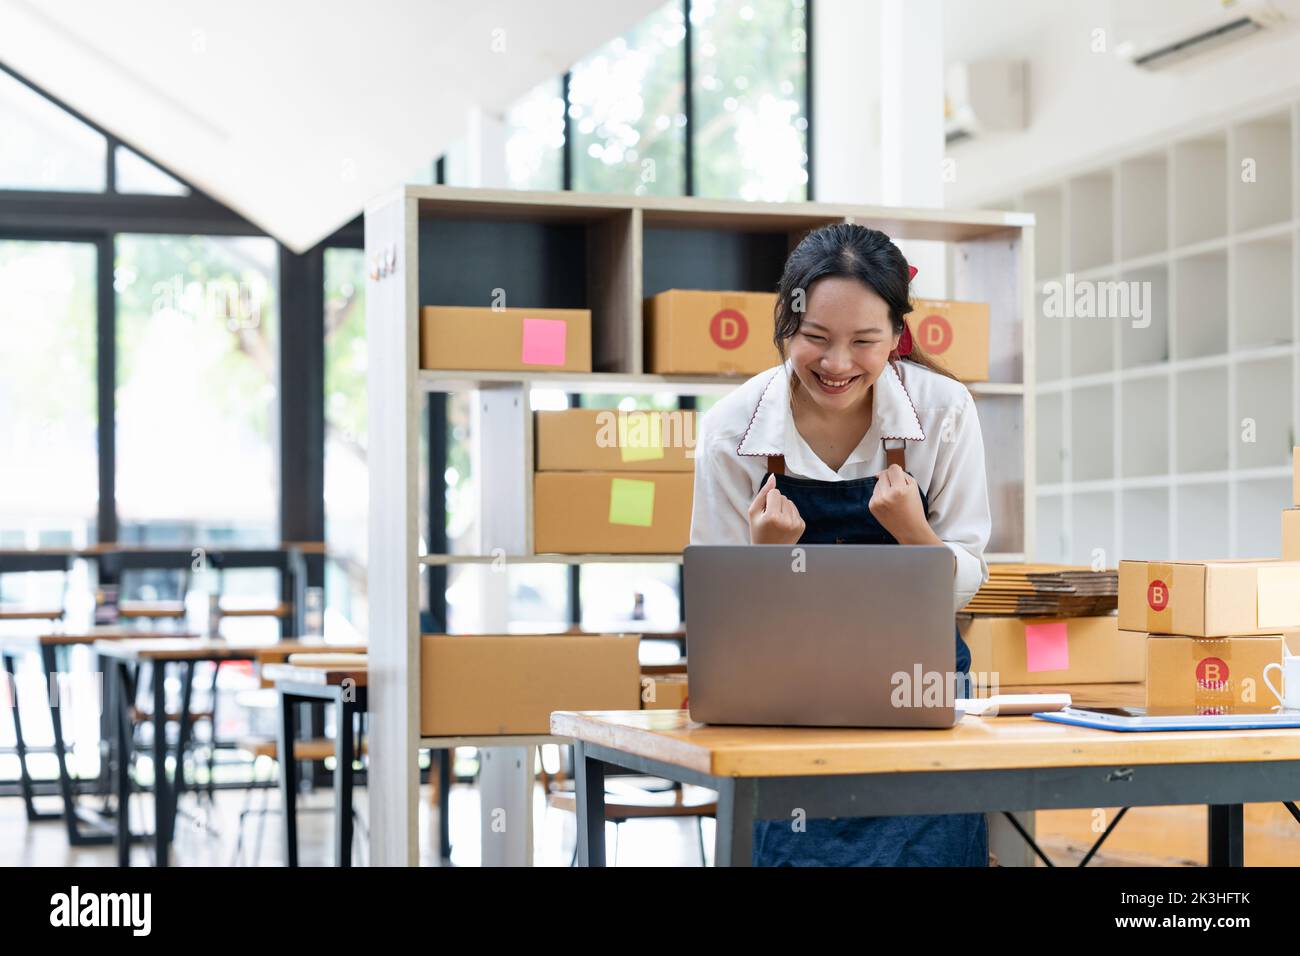 Happy successful SME entrepreneur with arms up, Home office, Business online and delivery, Selling online, Startup small business concept. Stock Photo